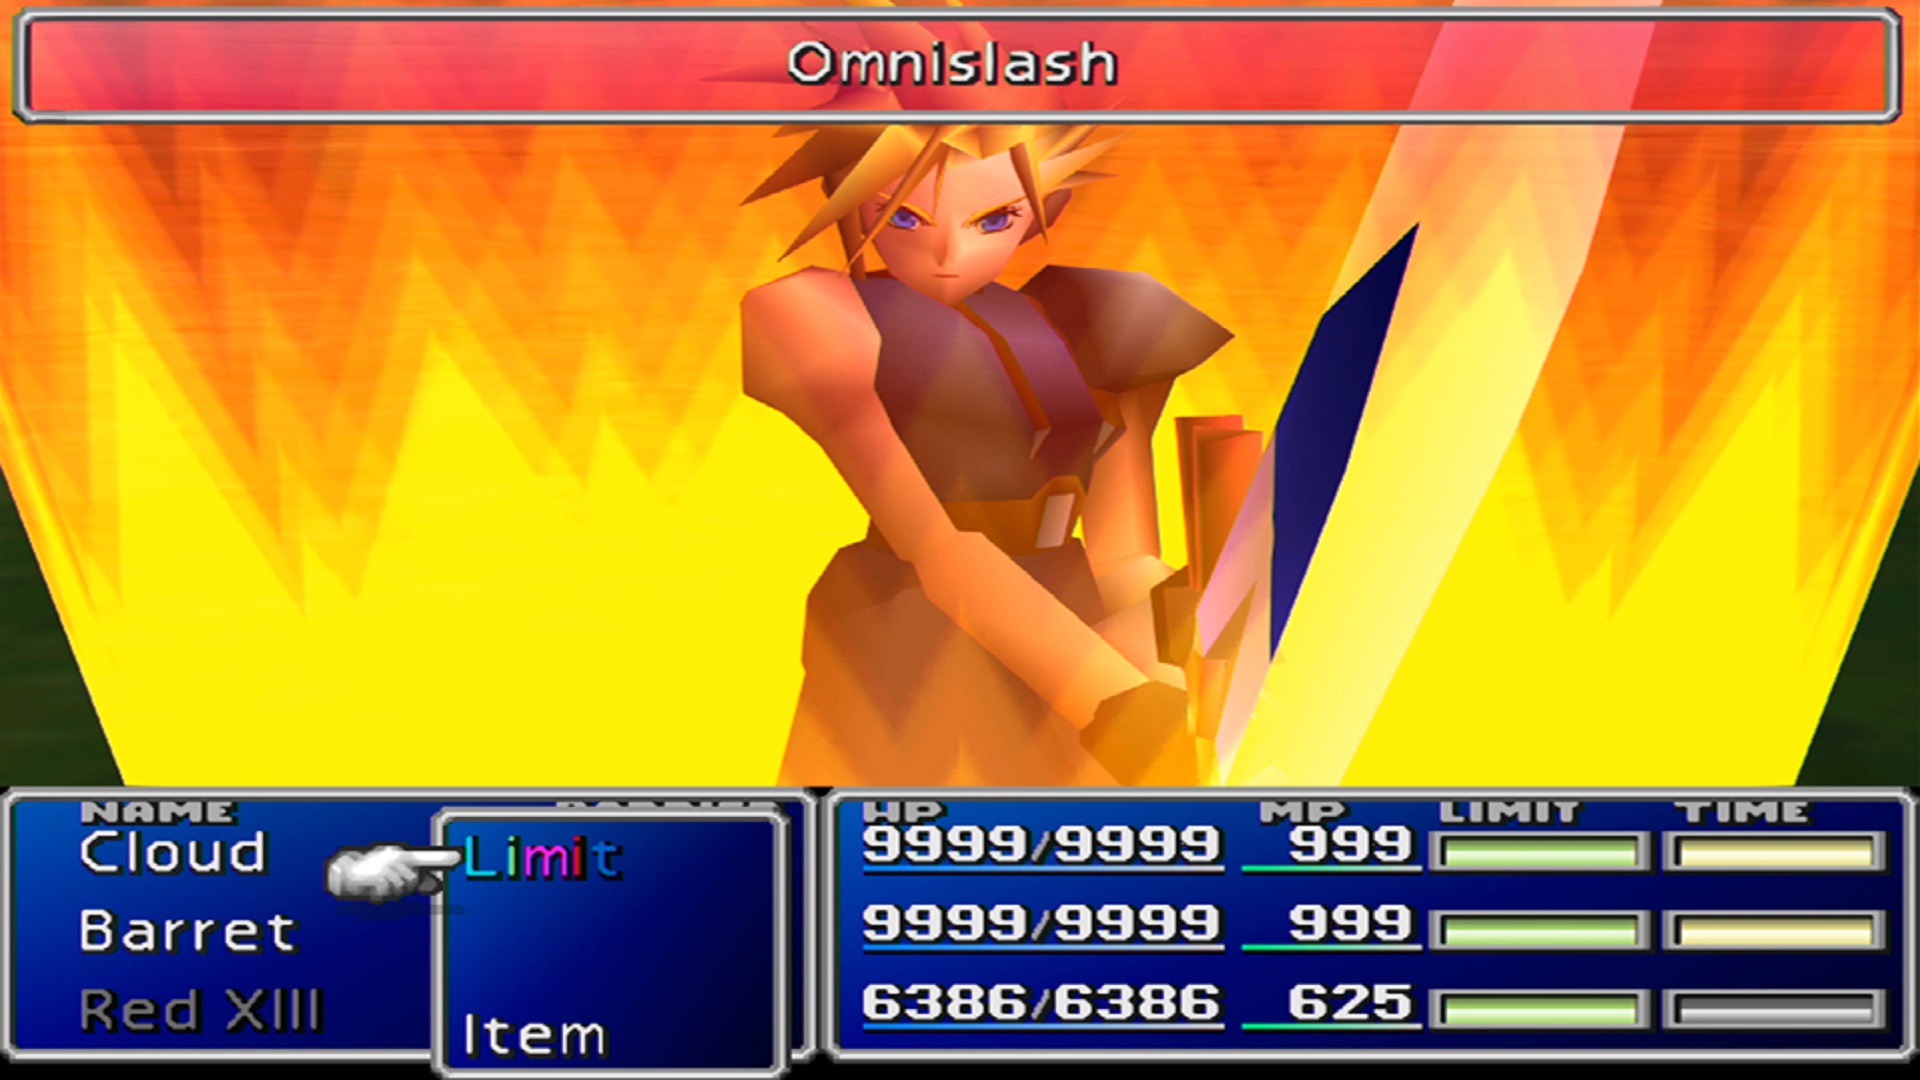 Best iOS games: Final Fantasy VII. Image shows Cloud about to perform an omnislash move.